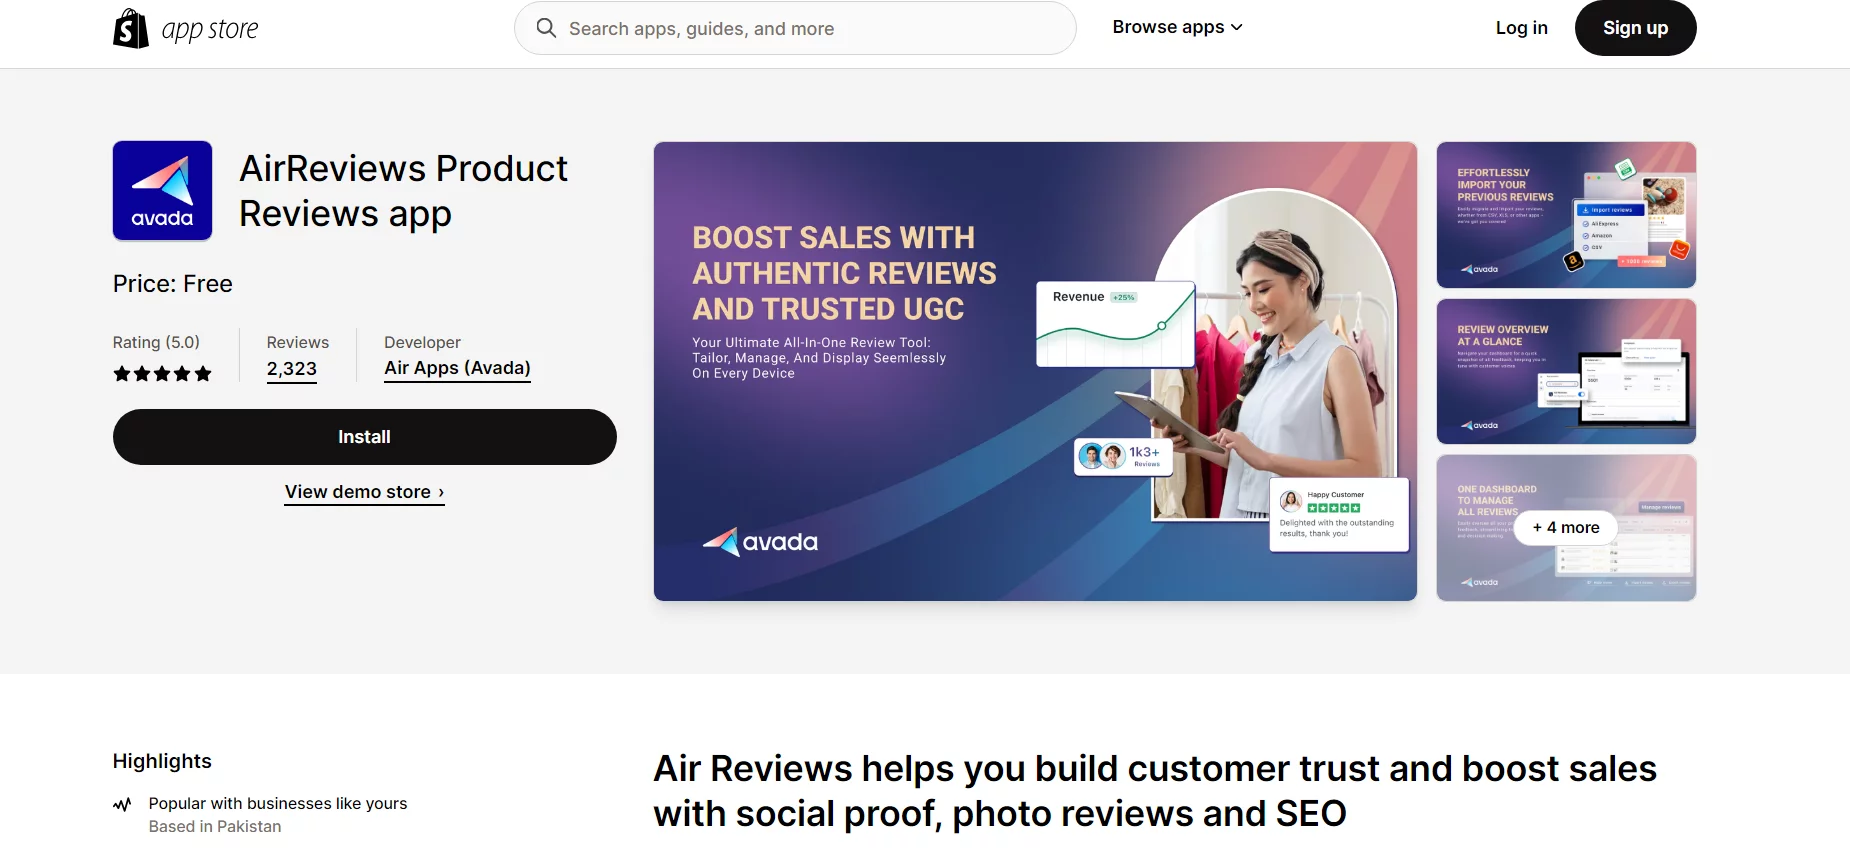 AirReviews Product Reviews app